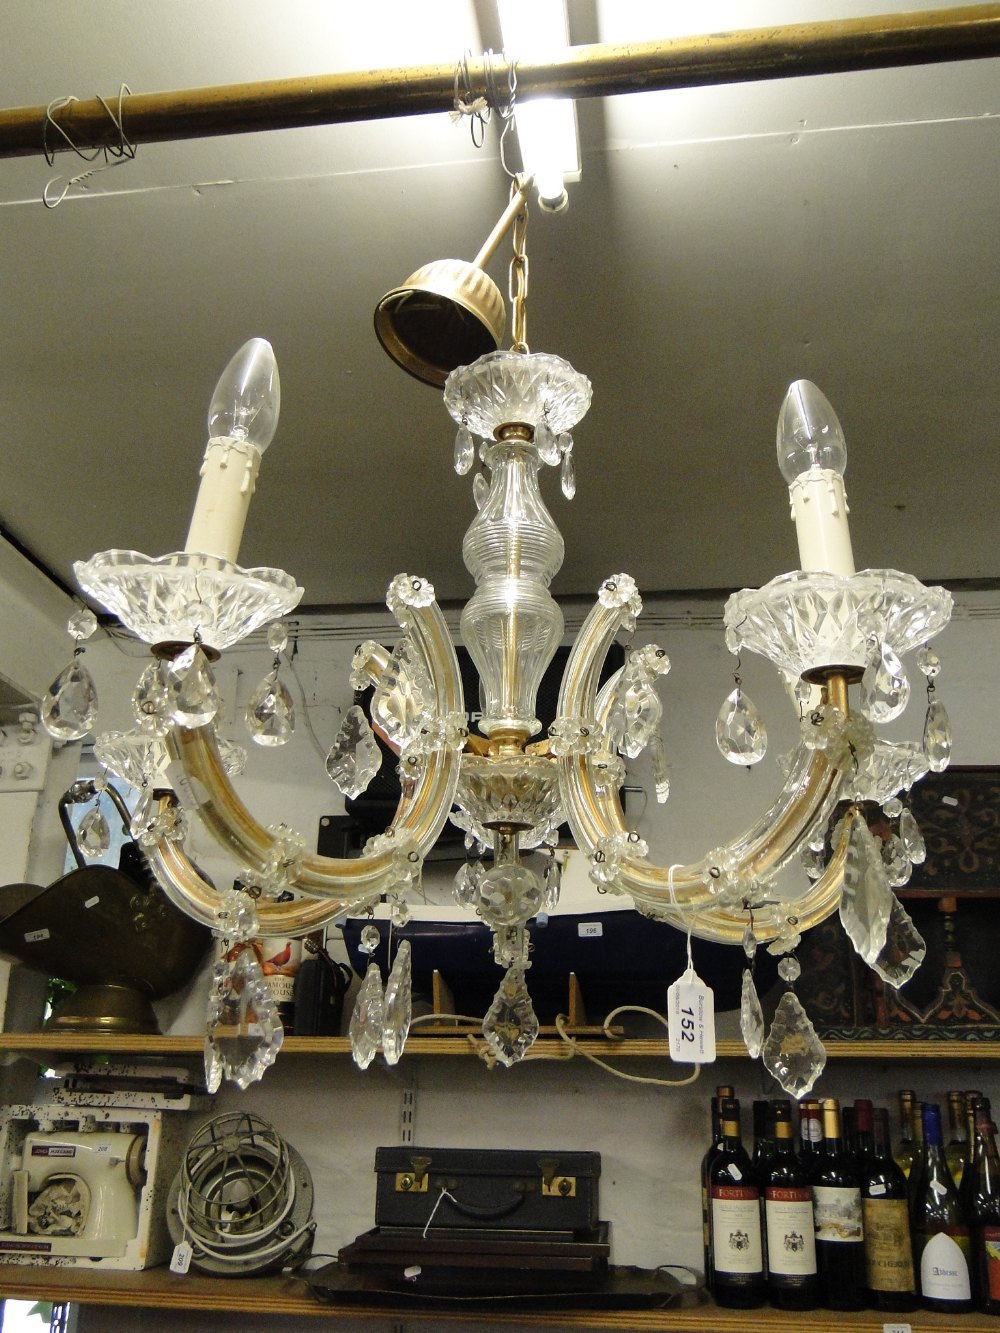 A 5 branch glass chandelier with cut-glass drops.